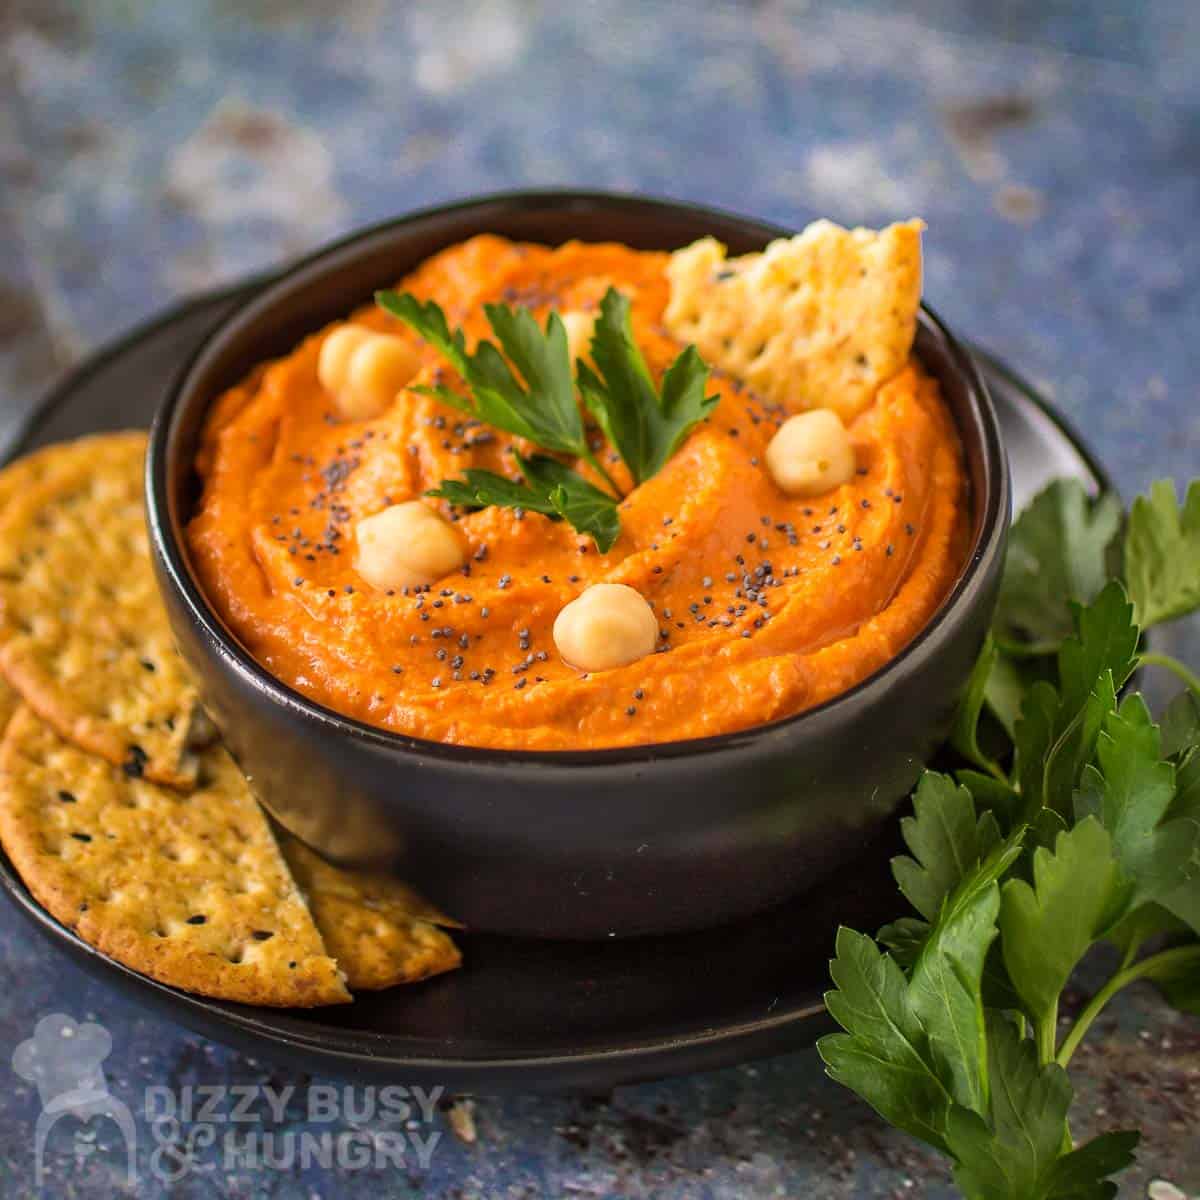 Side angled shot of red pepper hummus in a black bowl on a black plate garnished with pepper, chickpeas, and herbs, and crackers and more herbs on the side.